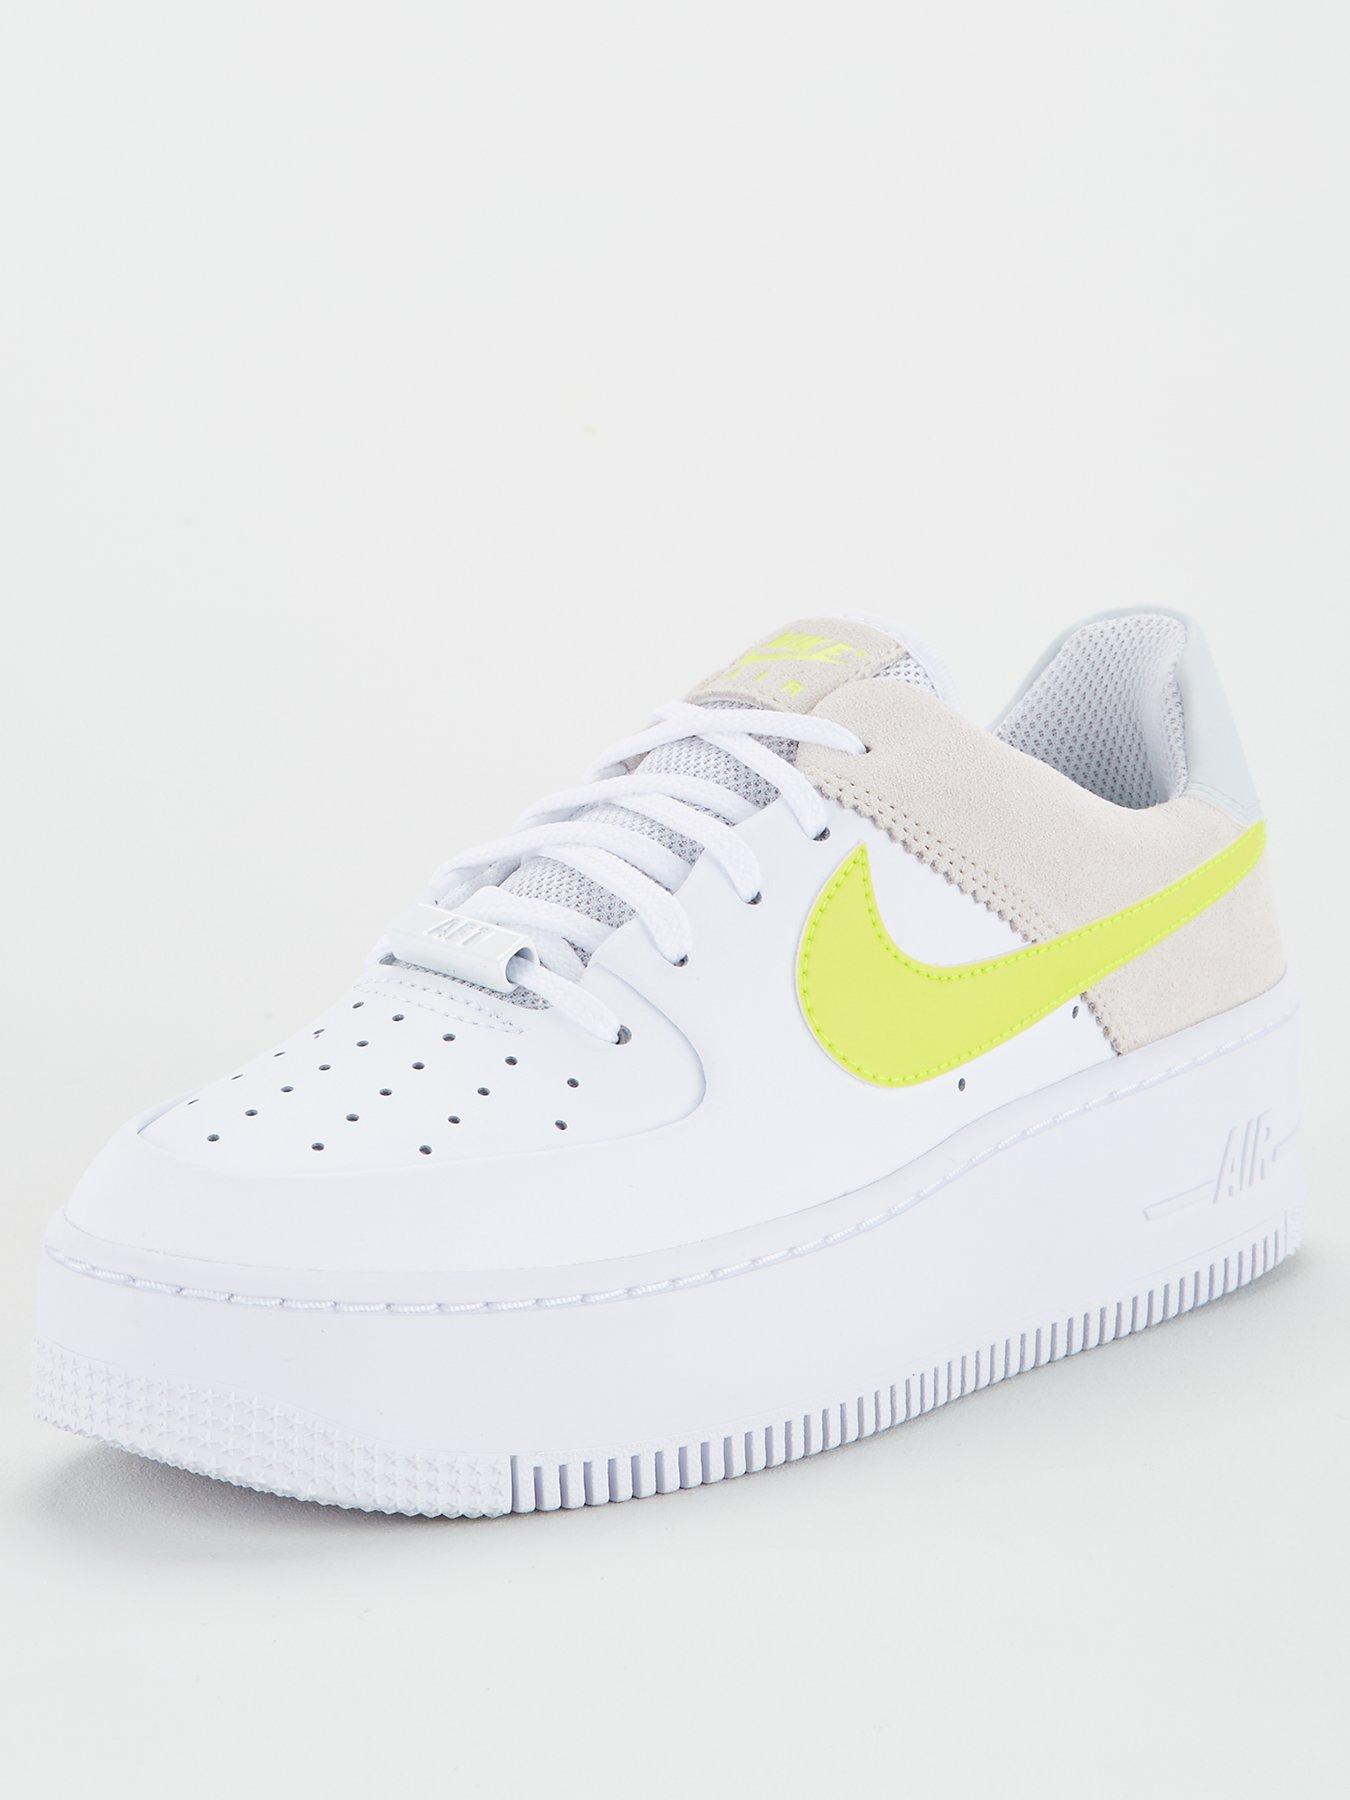 air force 1 neon yellow tick